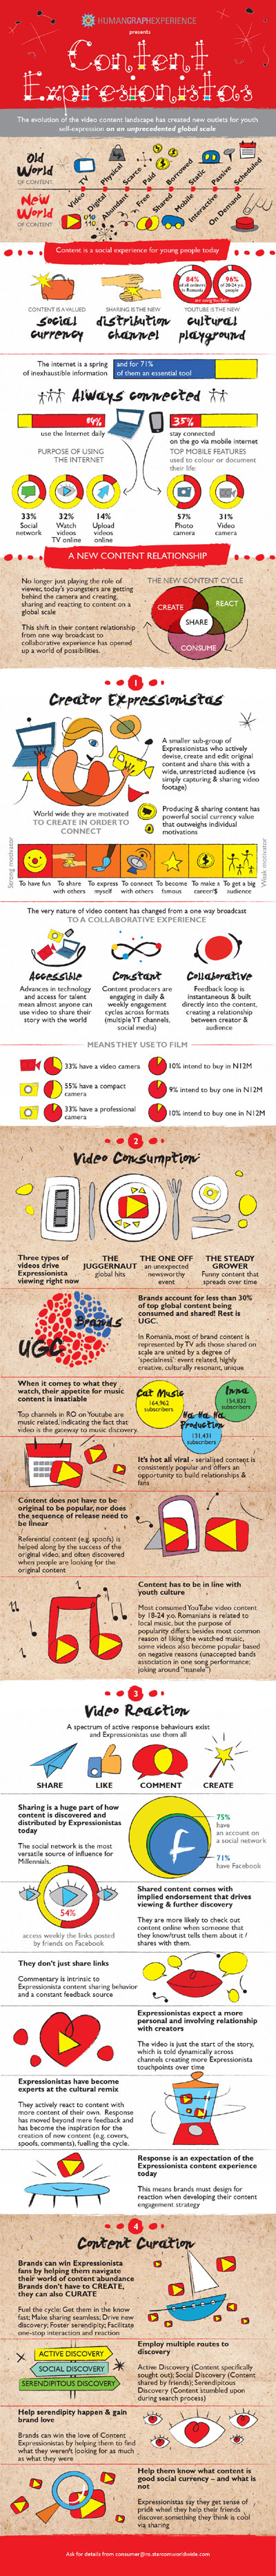 Content expresionistas - young people and video content #infographic 